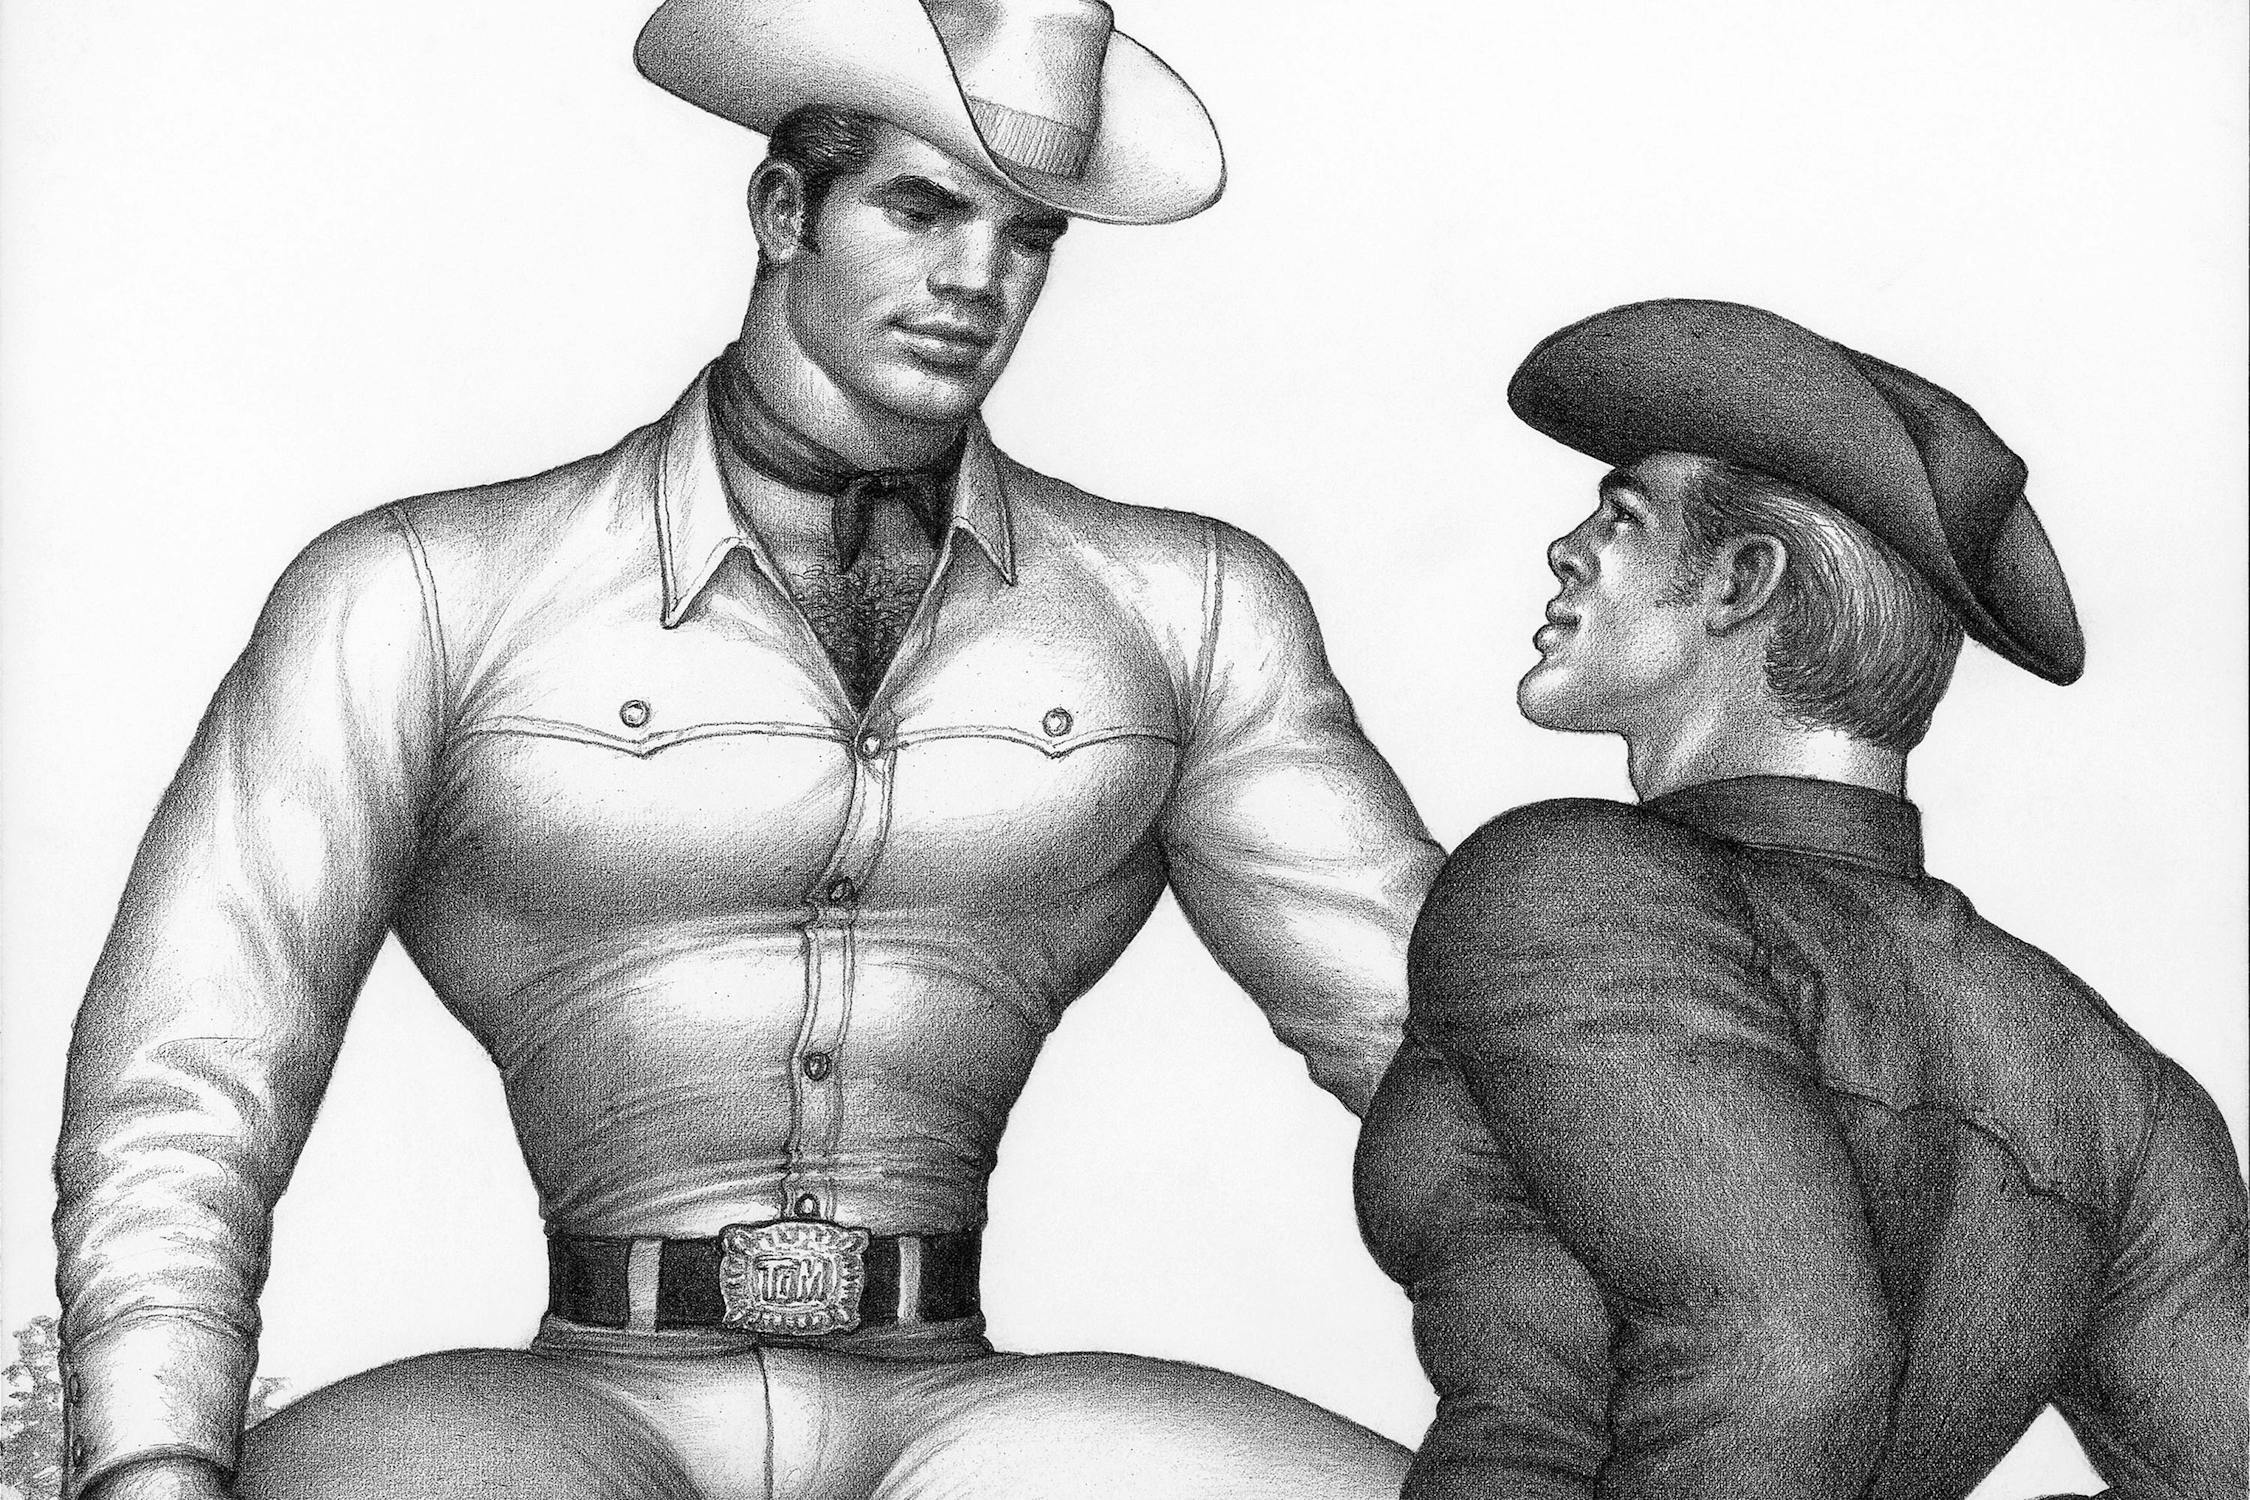 A Tom of Finland pencil drawing depicting a cowboy in a tight white shirt and stetson facing another cowboy wearing a dark shirt and stetson